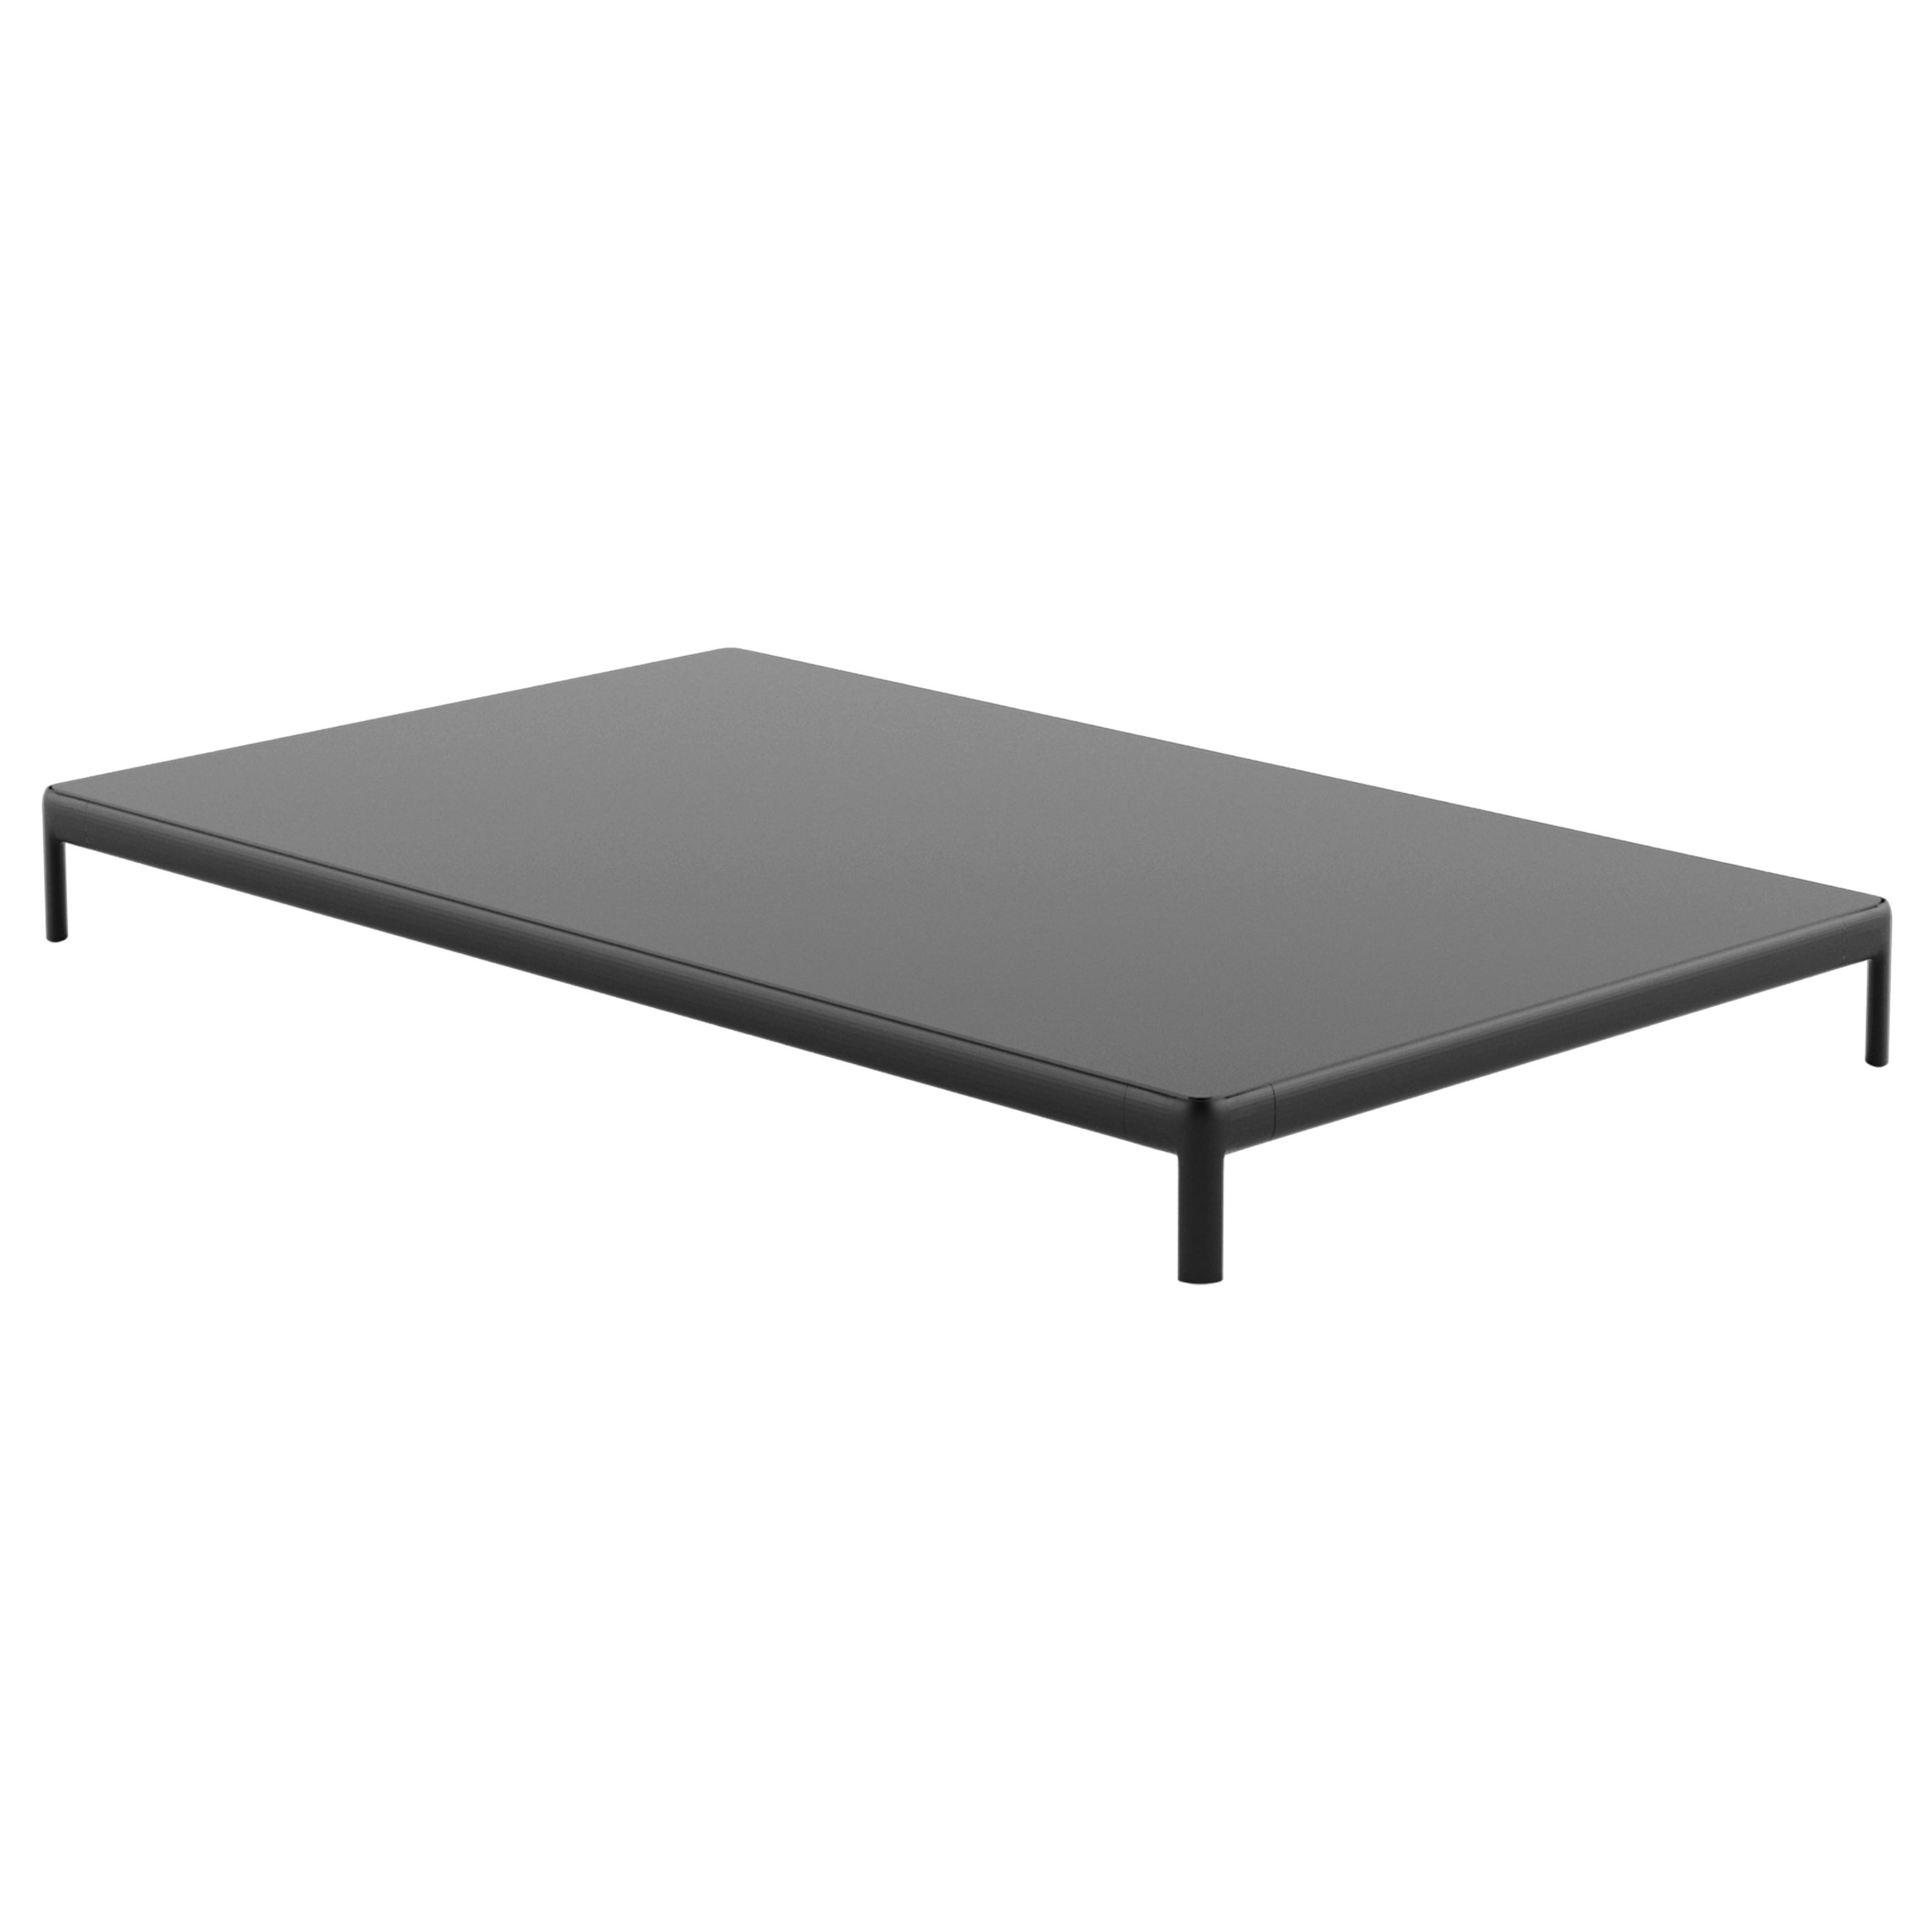 Alias P73 AluZen Soft Low Table Outdoor in Grey with Lacquered Aluminium Frame For Sale